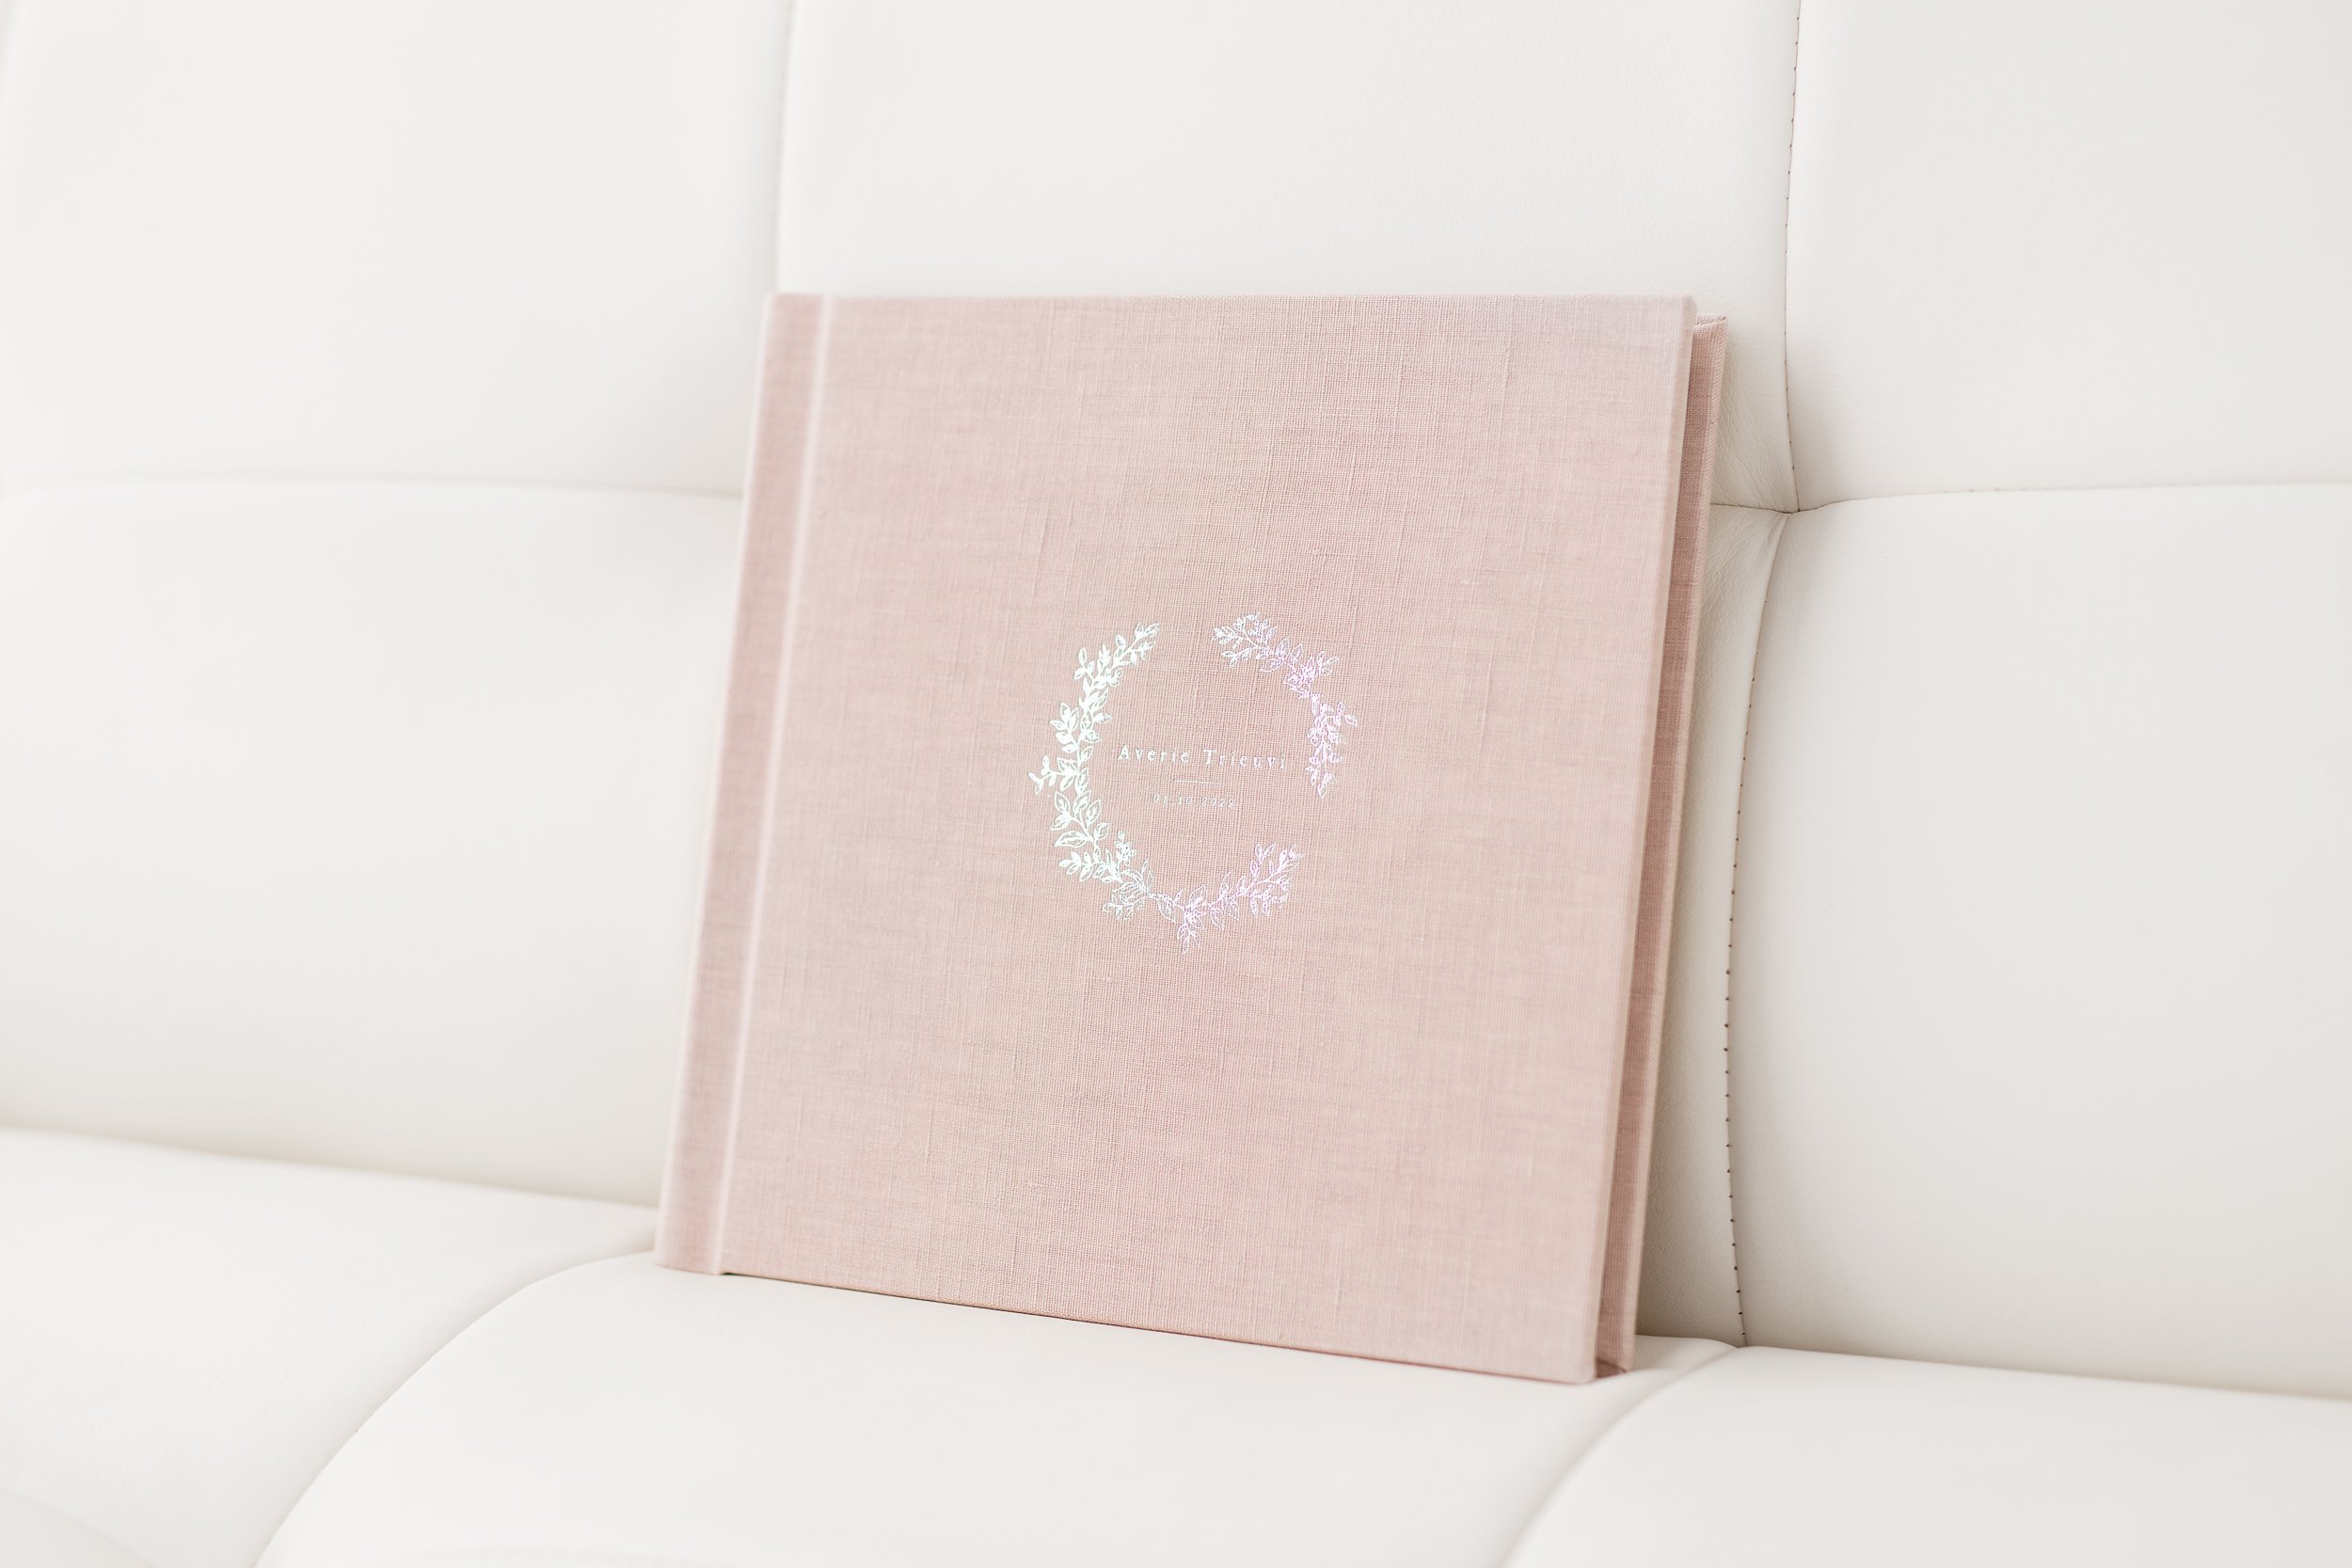  A pink linen bound studio portrait book created by Nicole Hawkins Photography, a New Jersey and New York studio photographer #studioportraits #newborn #maplewoodNJ #nicolehawkinsphotography #newjerseyphotographer  #portraitphotography #heirloomphoto